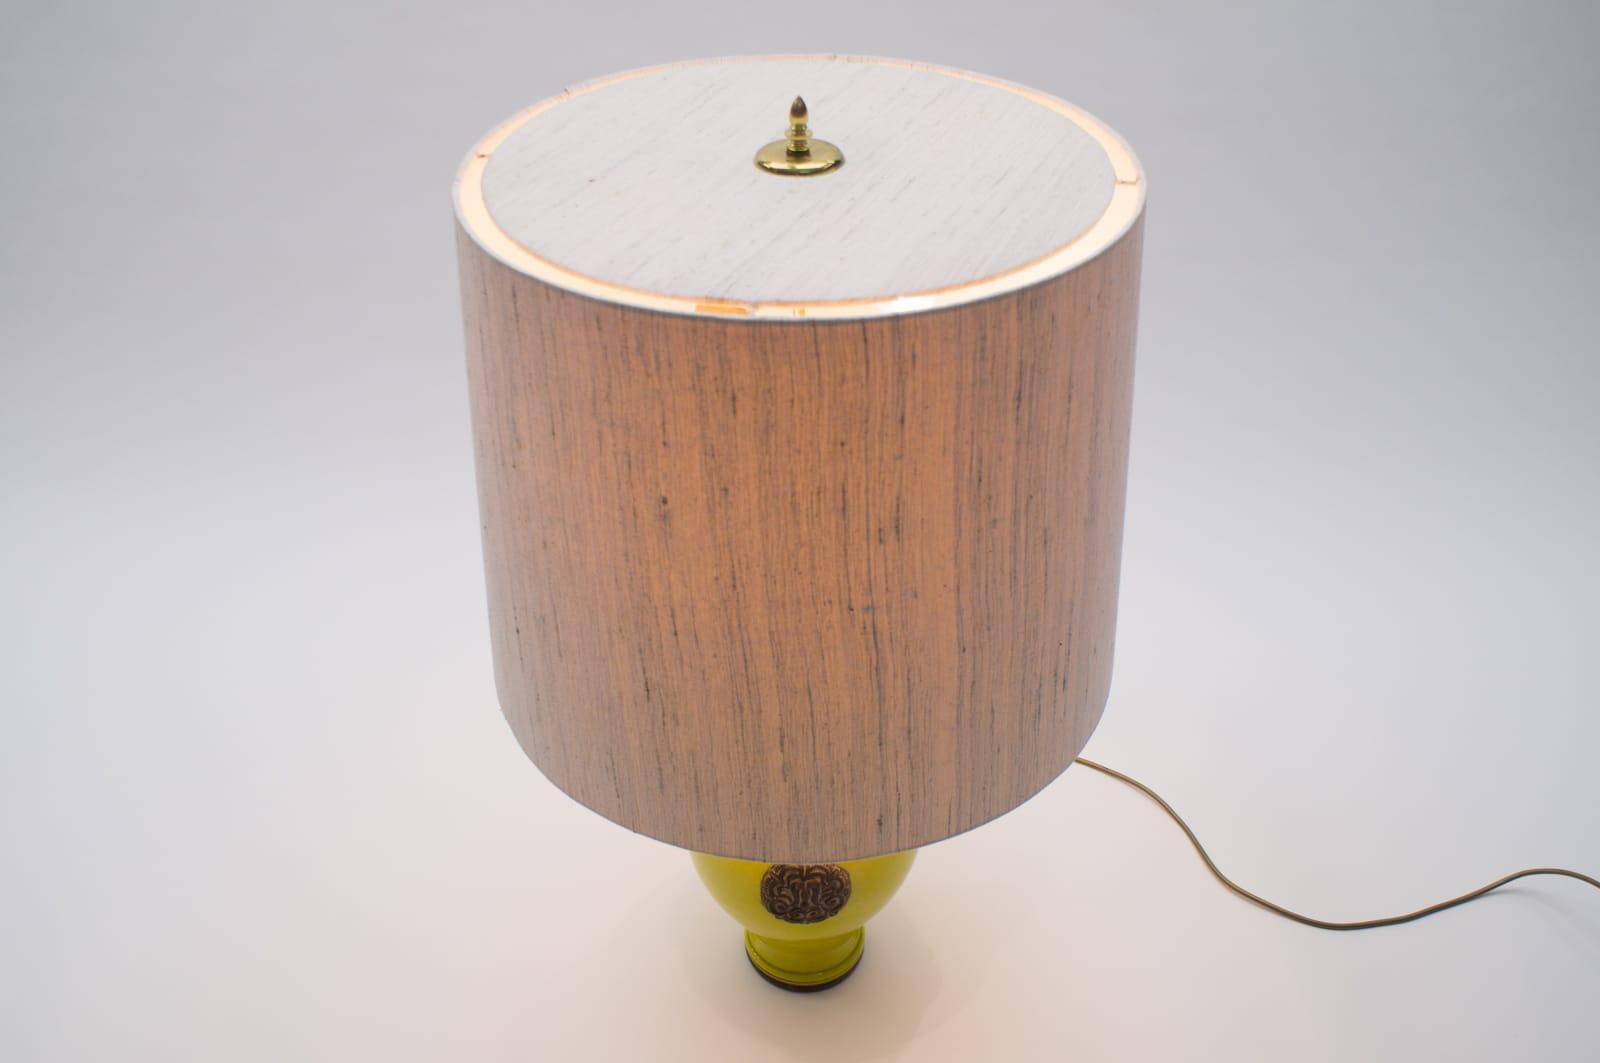 Milieu du XXe siècle Oatmeal and Yellow Gilt Glazed Ceramic Table Lamp by Ugo Zaccagnini, Italy 1960s en vente